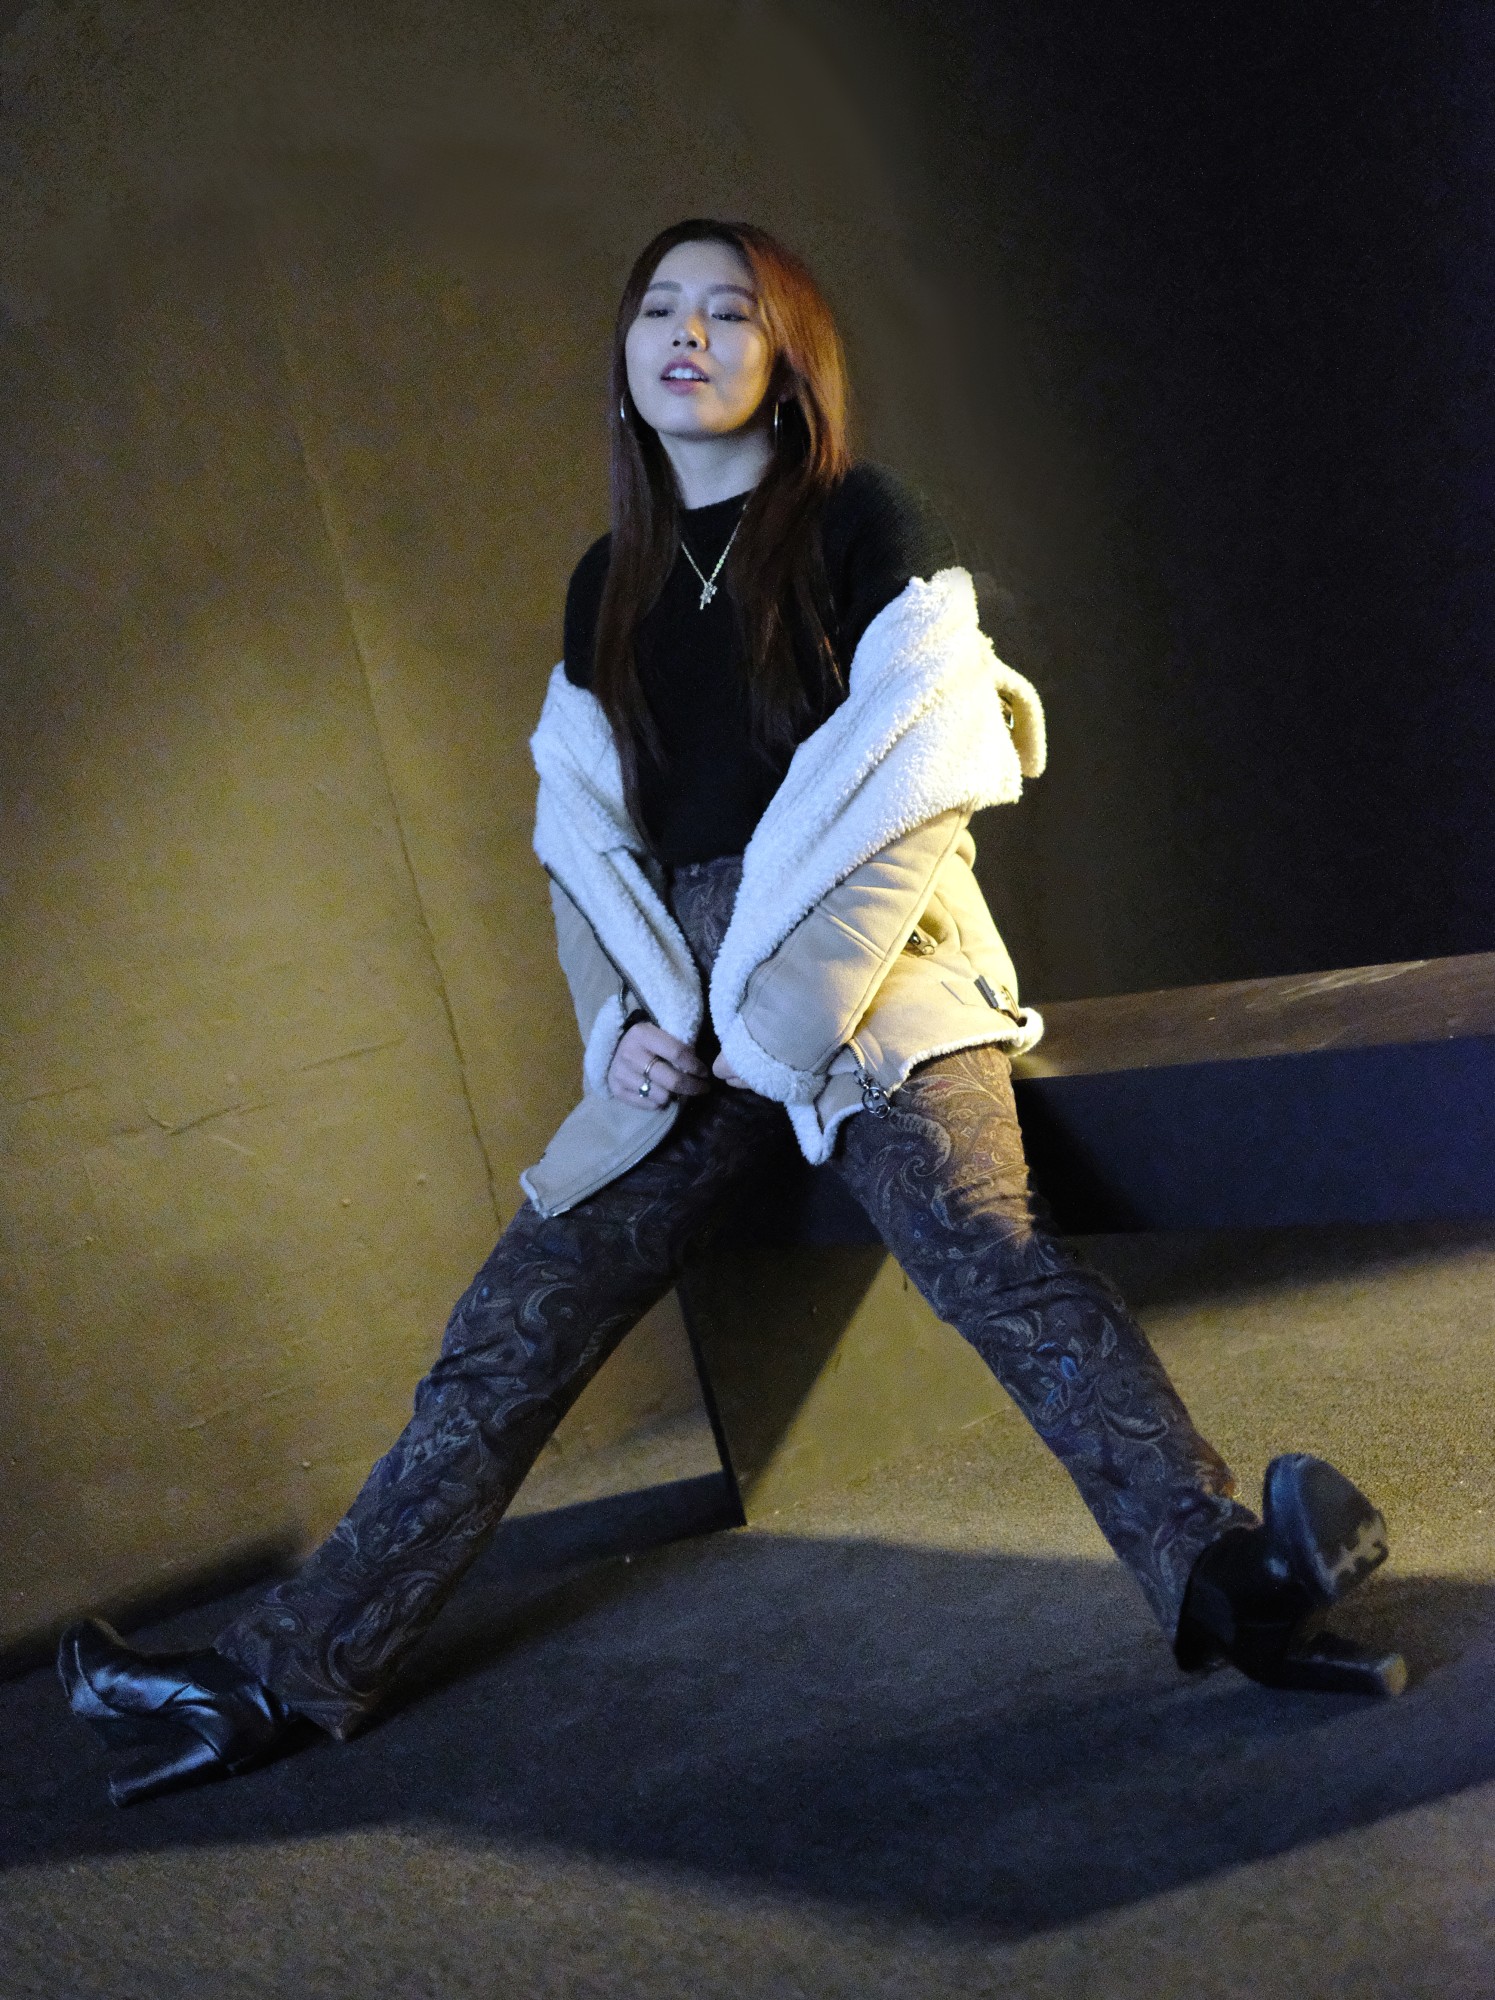 Japanese girl in black outfit and shearling jacket